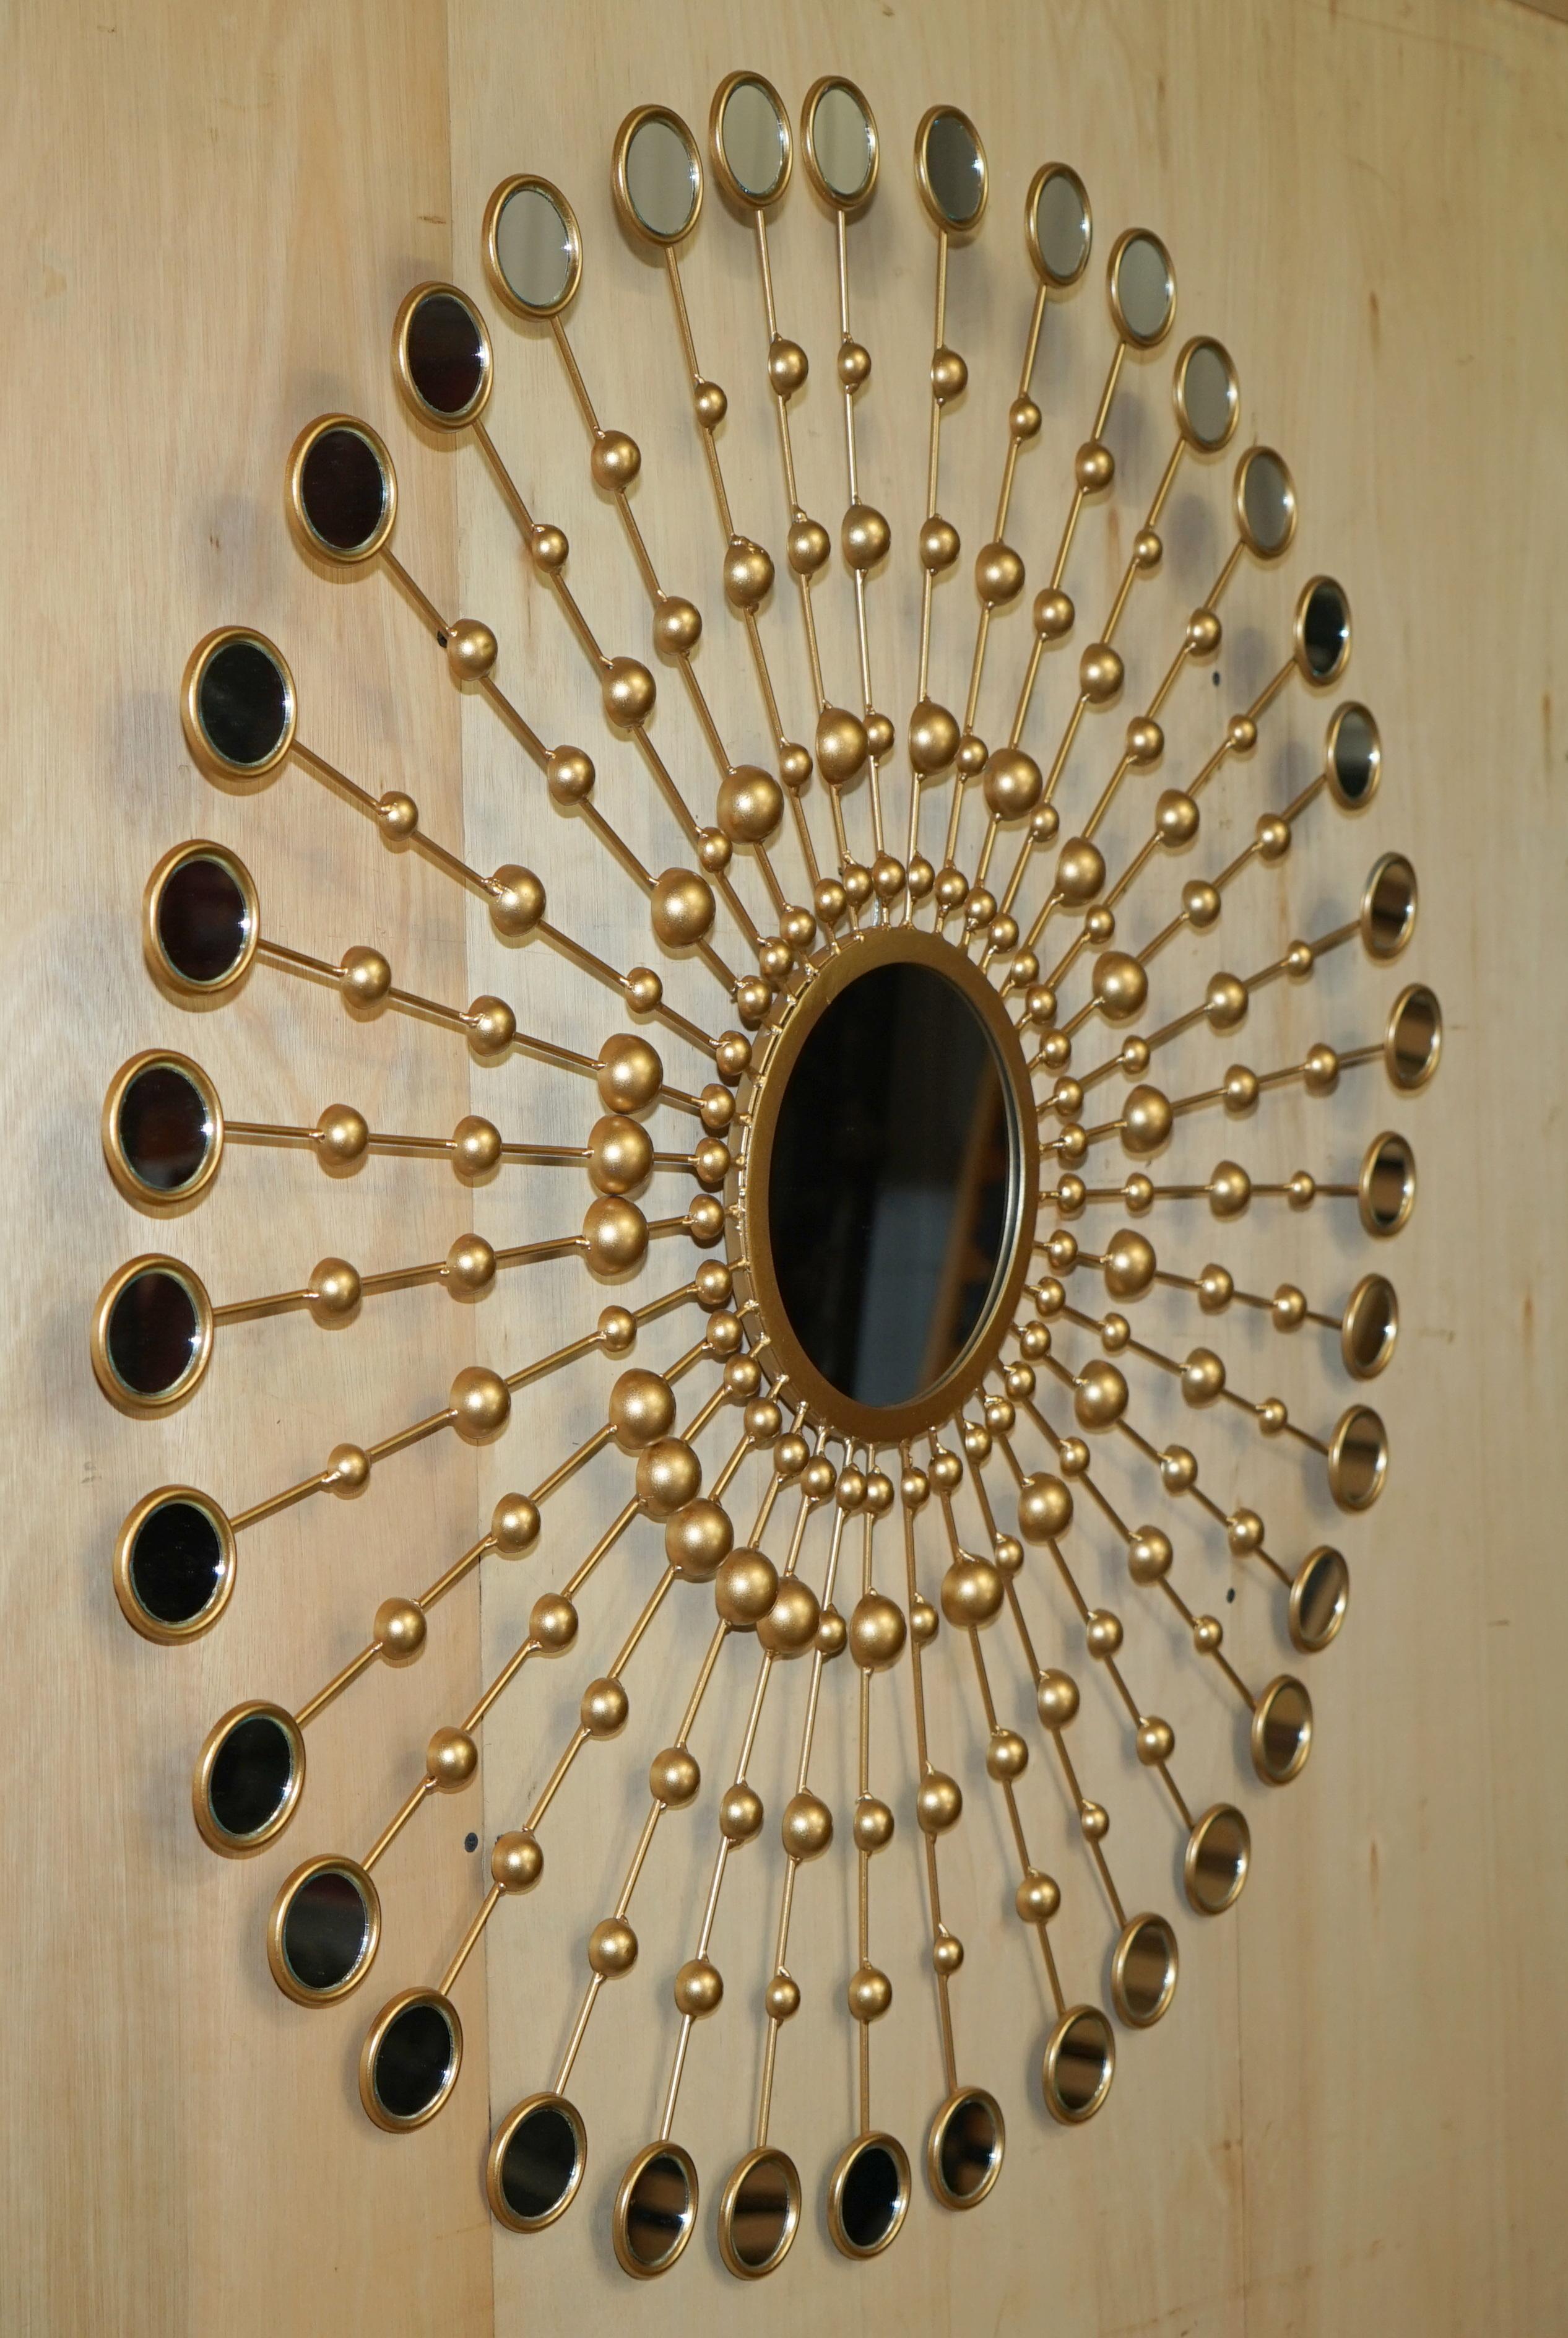 LOVELY LOOKiNG DECORATIVE LARGE WALL MIRROR WITH 36 SMALL MIRRORS IN A SUN FORM For Sale 10